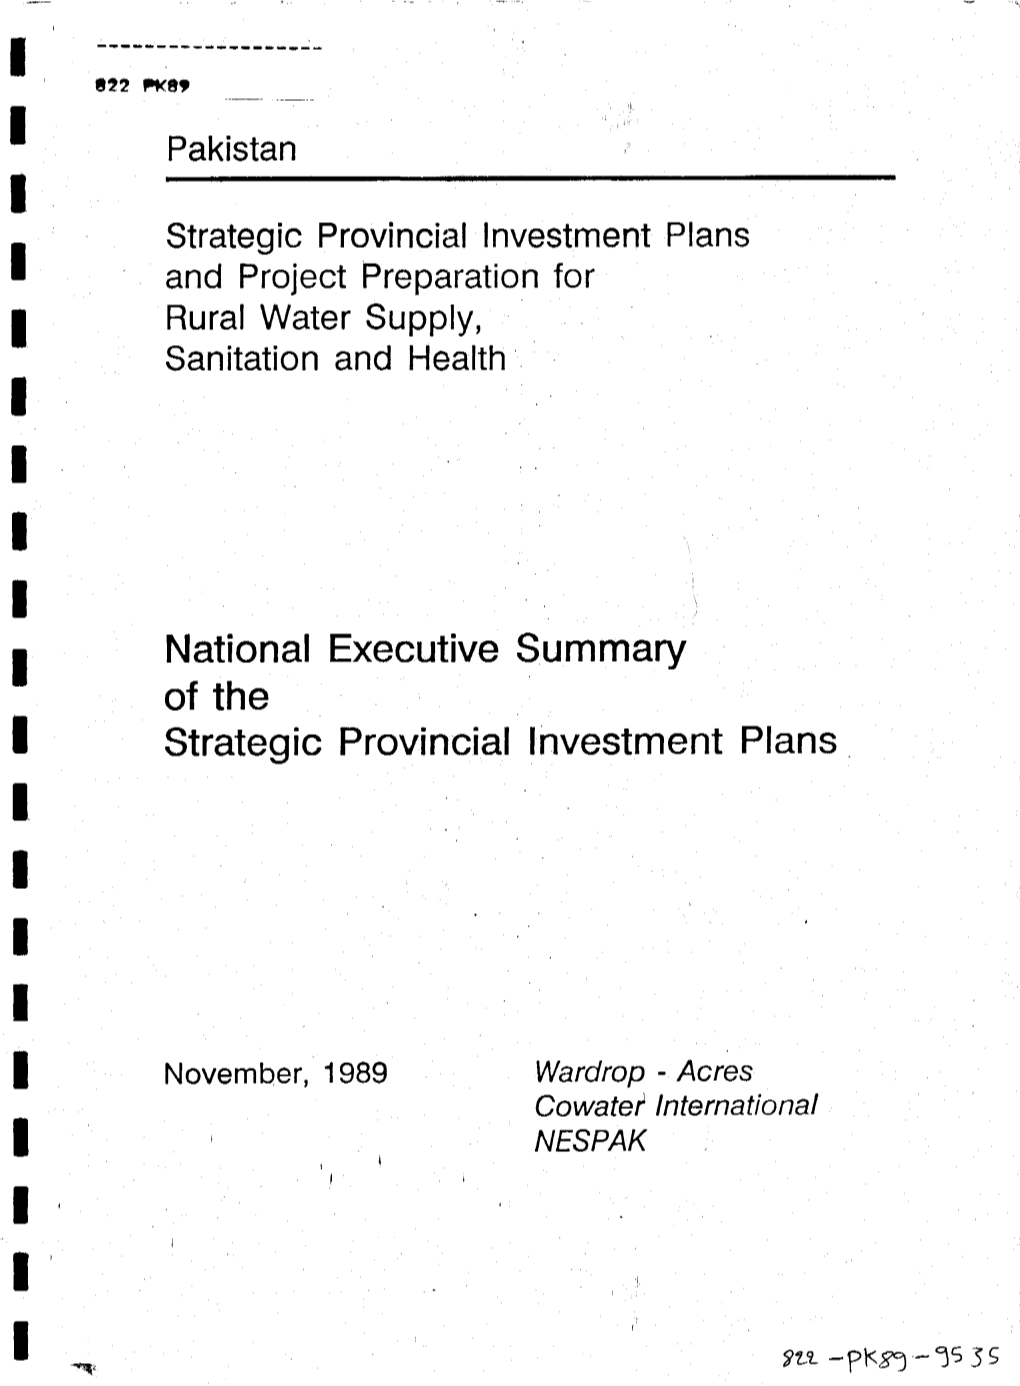 National Executive Summary of the Strategic Provincial Investment Plans